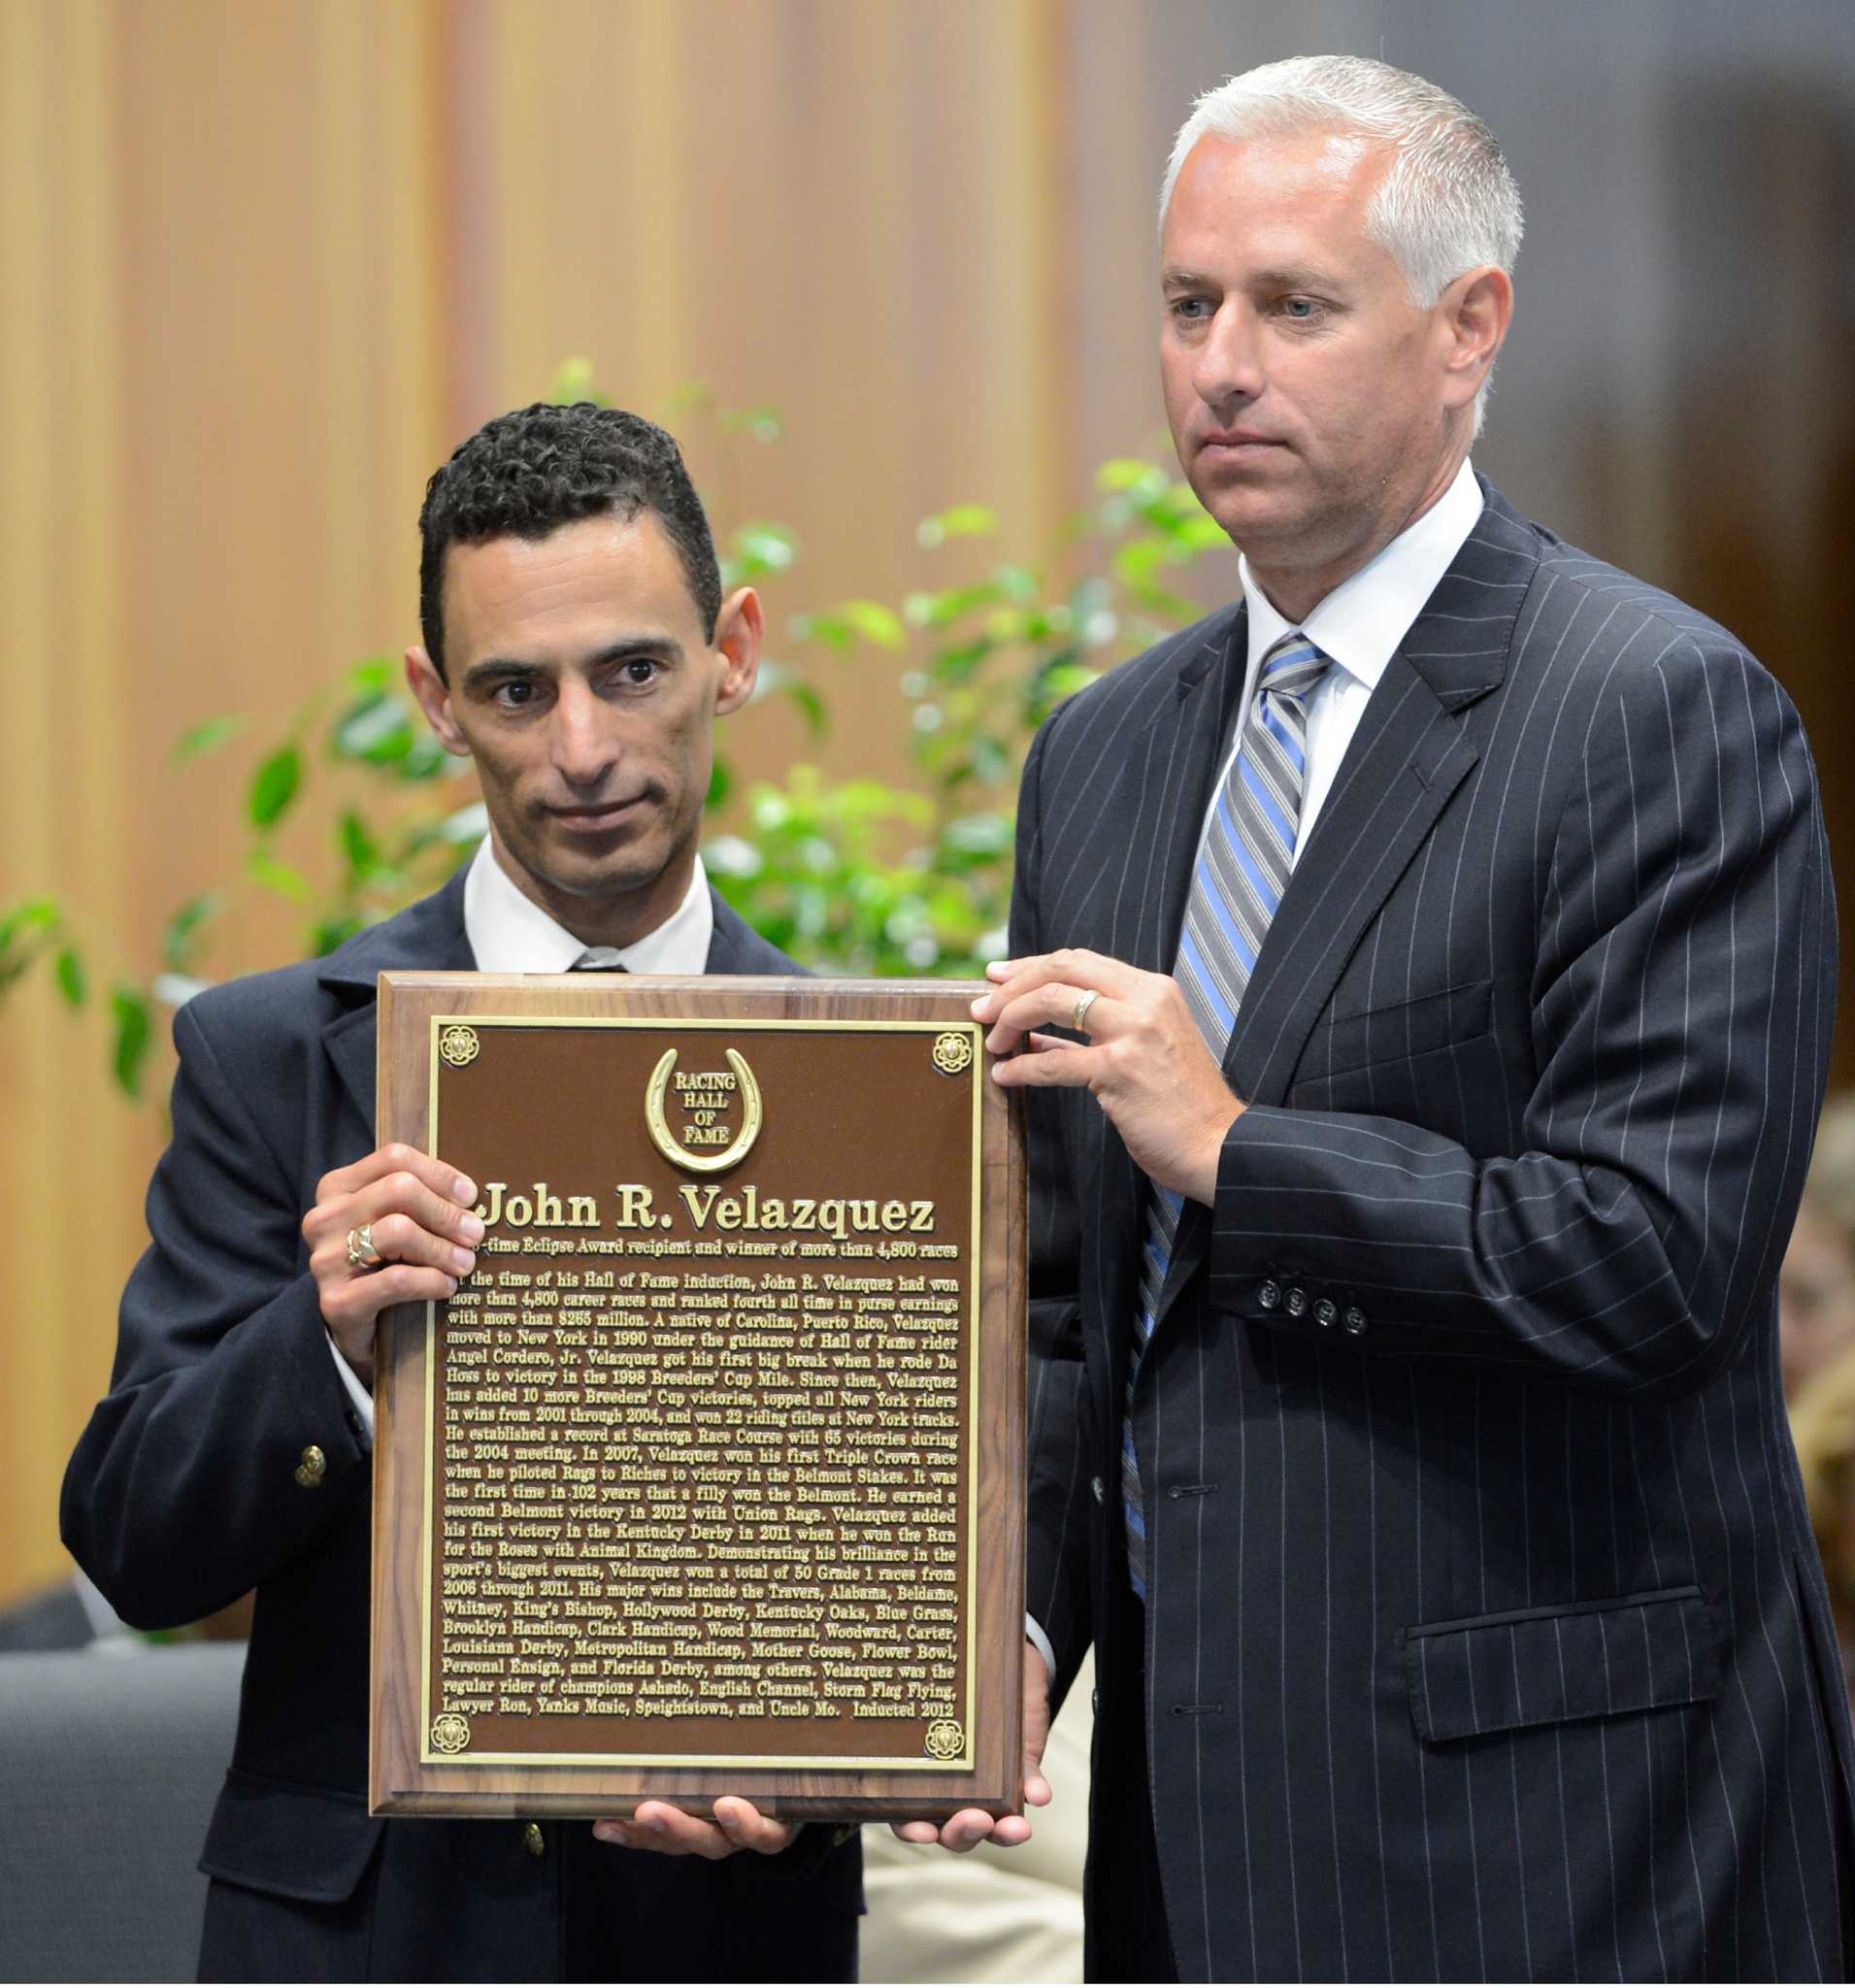 Velazquez emotional at Hall of Fame induction - Times Union